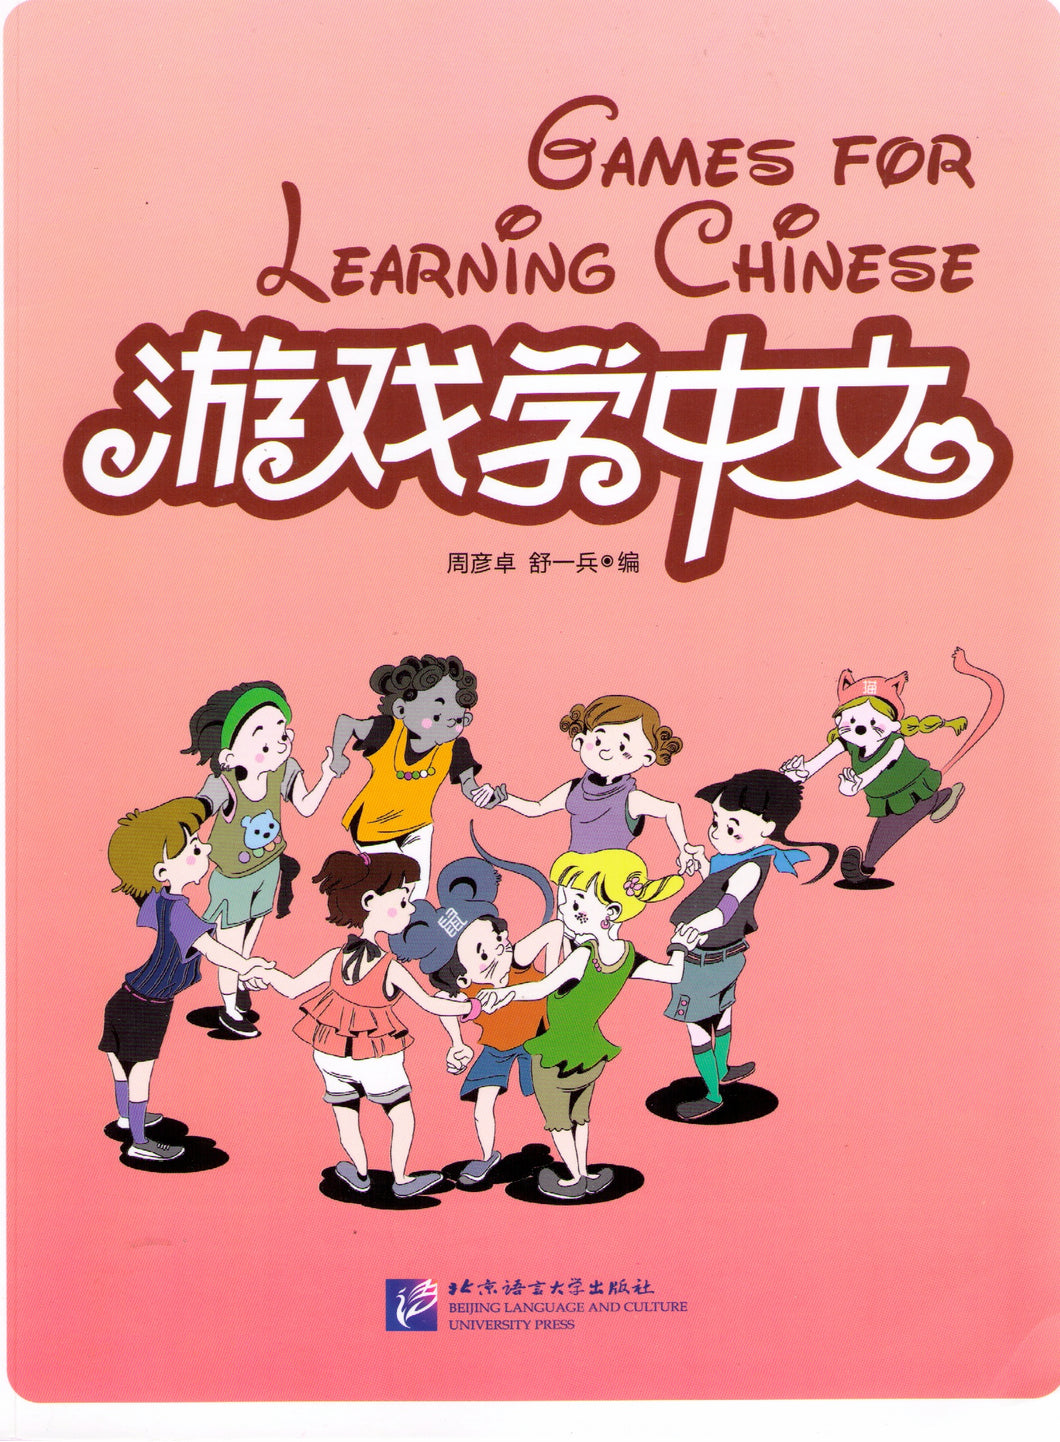 Games for Learning Chinese 游戏学中文